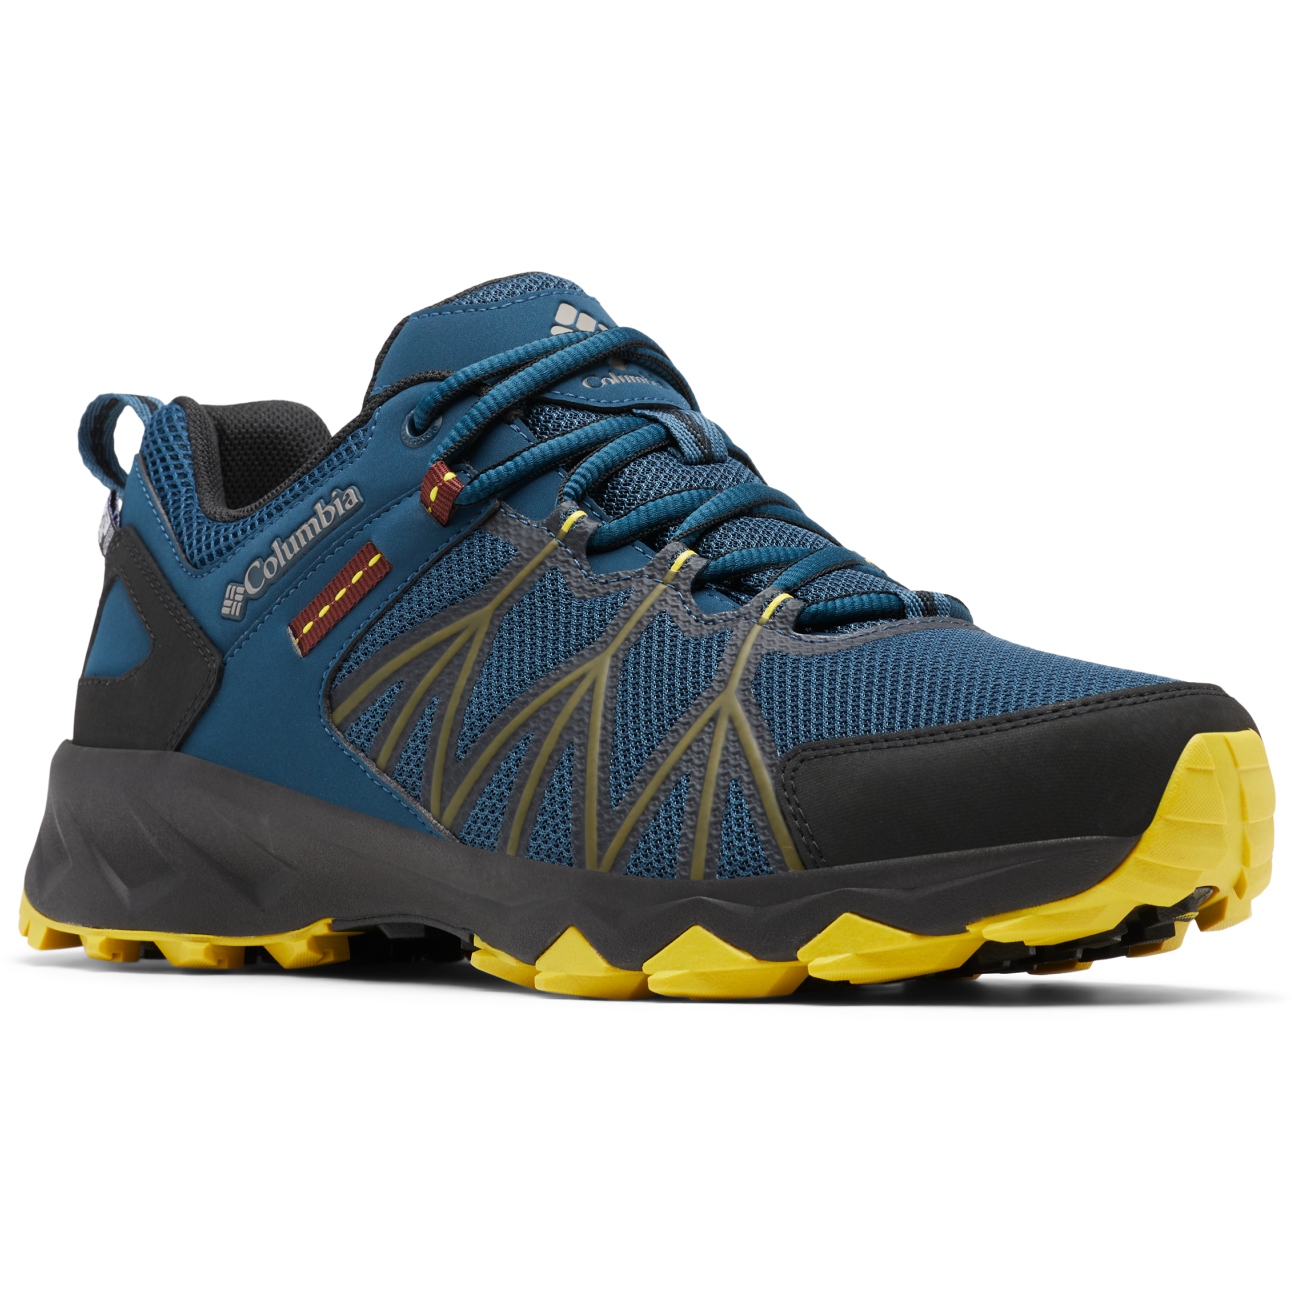 Picture of Columbia Peakfreak II Outdry Hiking Shoes - Petrol Blue/Black